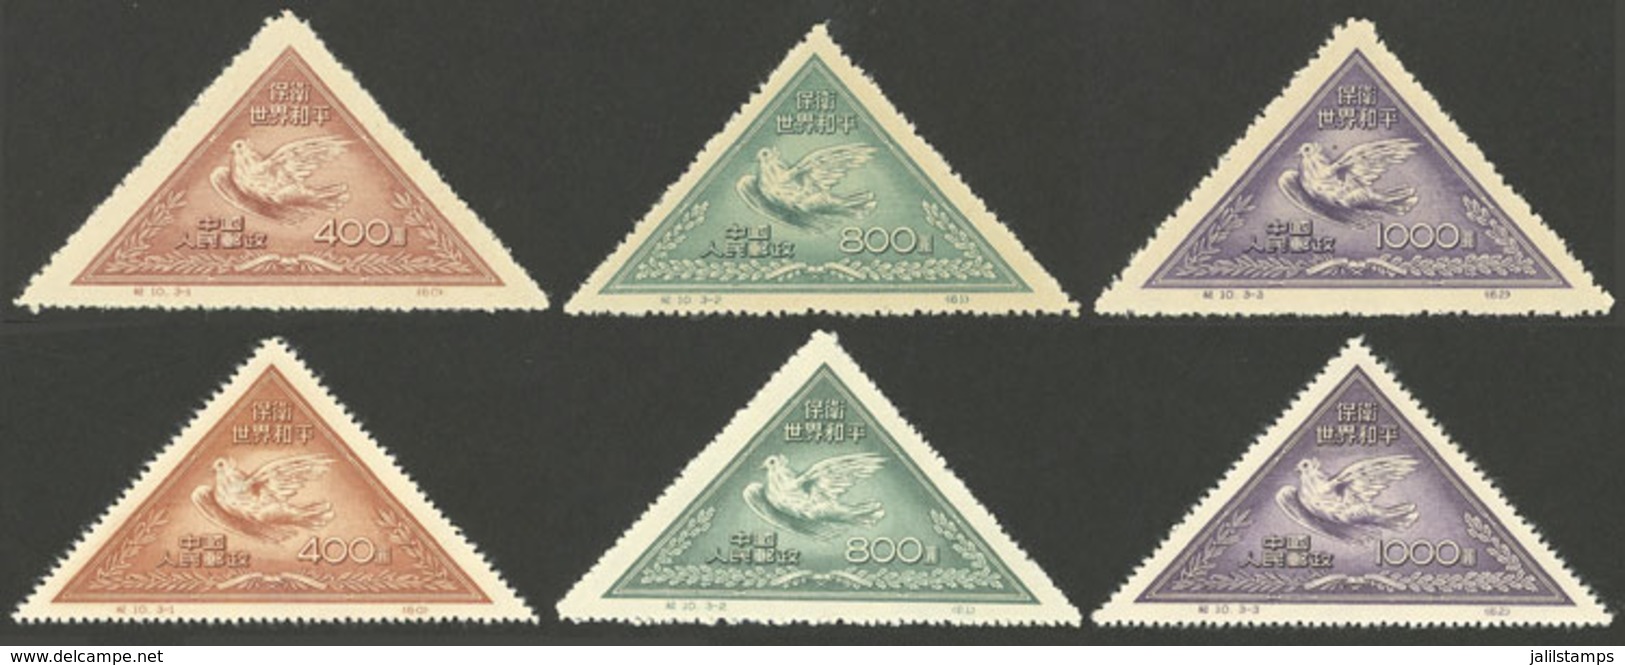 CHINA: Sc.108/110, 1951 Dove, World Peace, Cmpl. Set Of 3 Values, Mint Very Lightly Hinged (issued Without Gum), ORIGINA - Usati